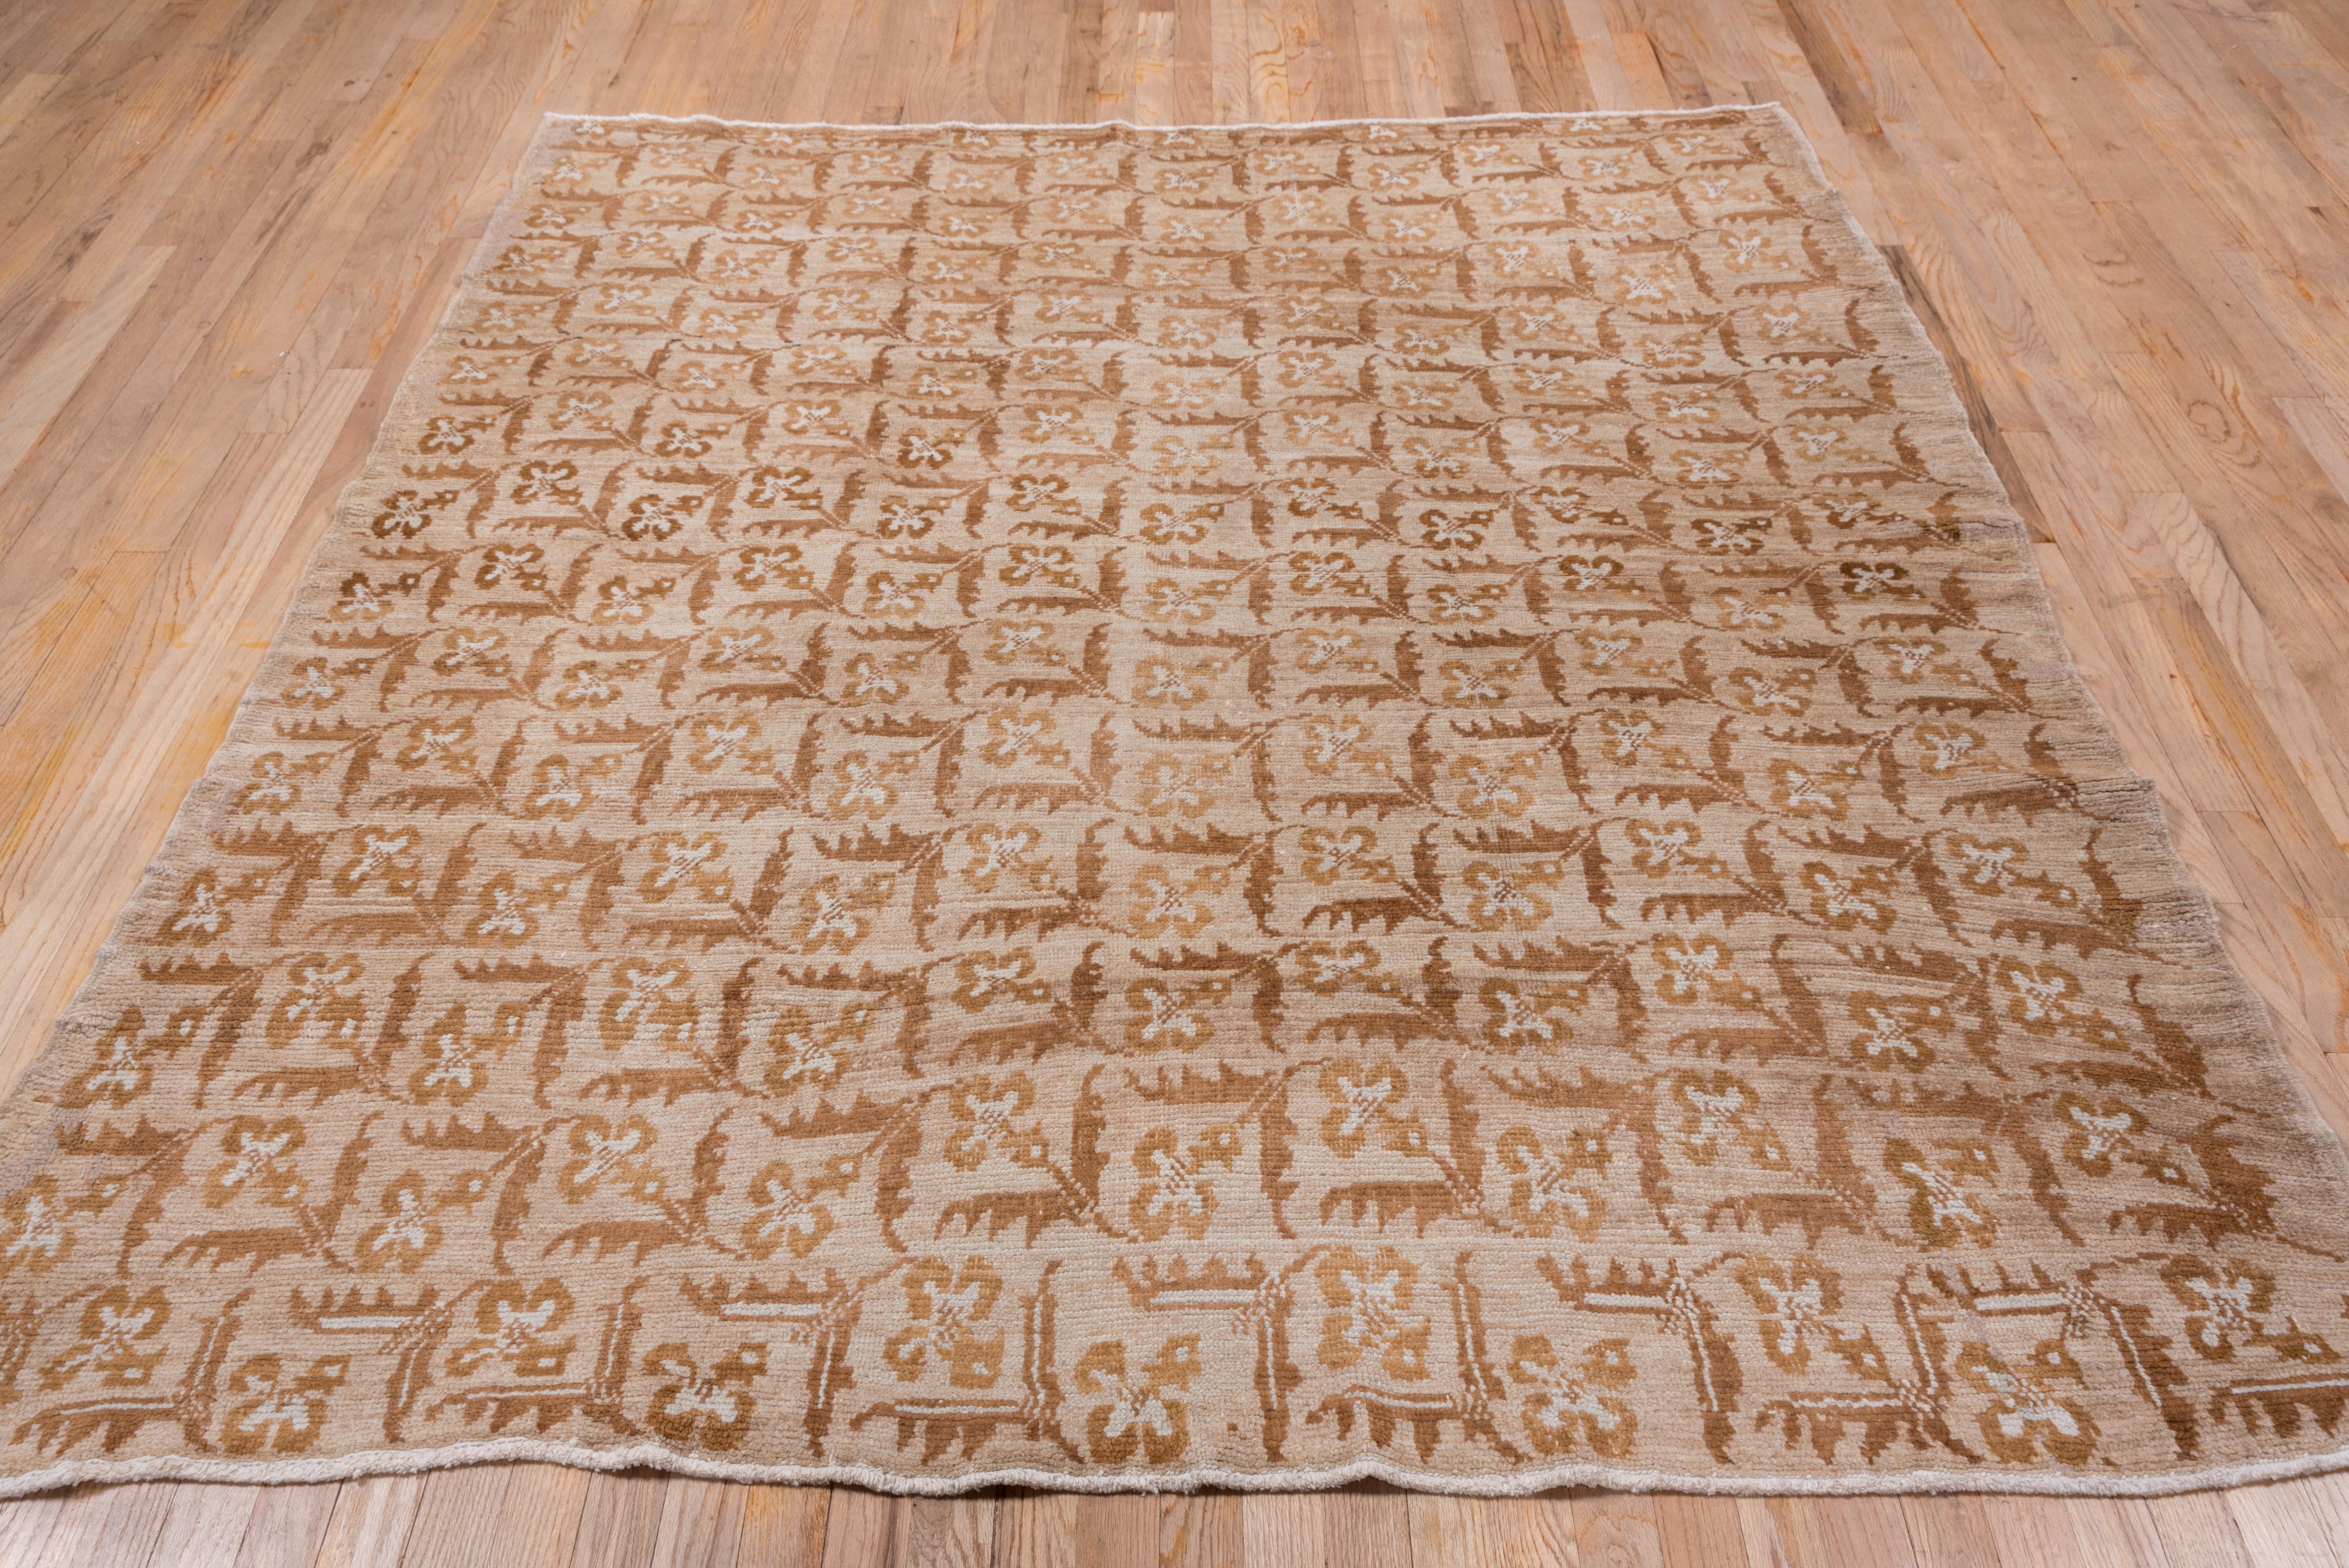 This borderless squarish Anatolian village rug displays an all-over, repeating pattern of flowers with rust-buff blossoms and olive twin serrated leaves. The flowers change vertical orientation column by column.